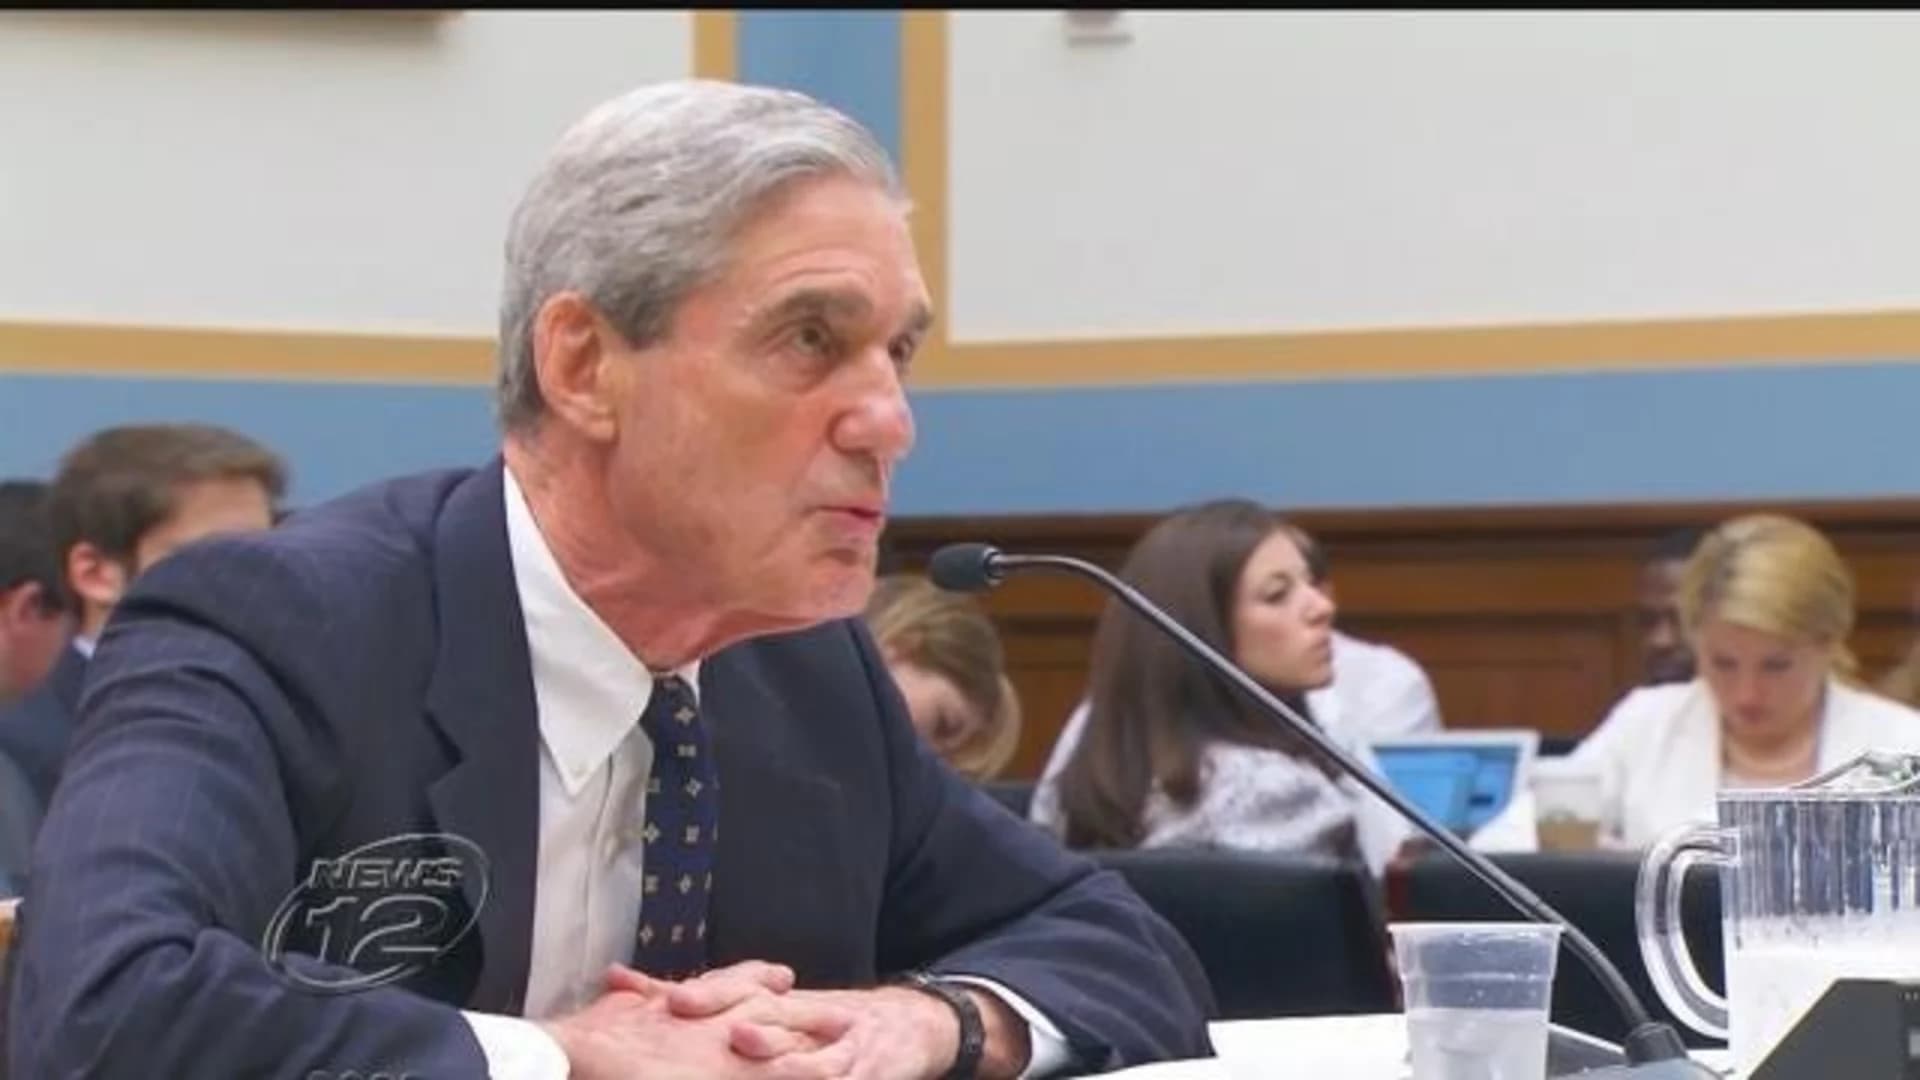 New Jersey lawmakers sound off on Mueller report